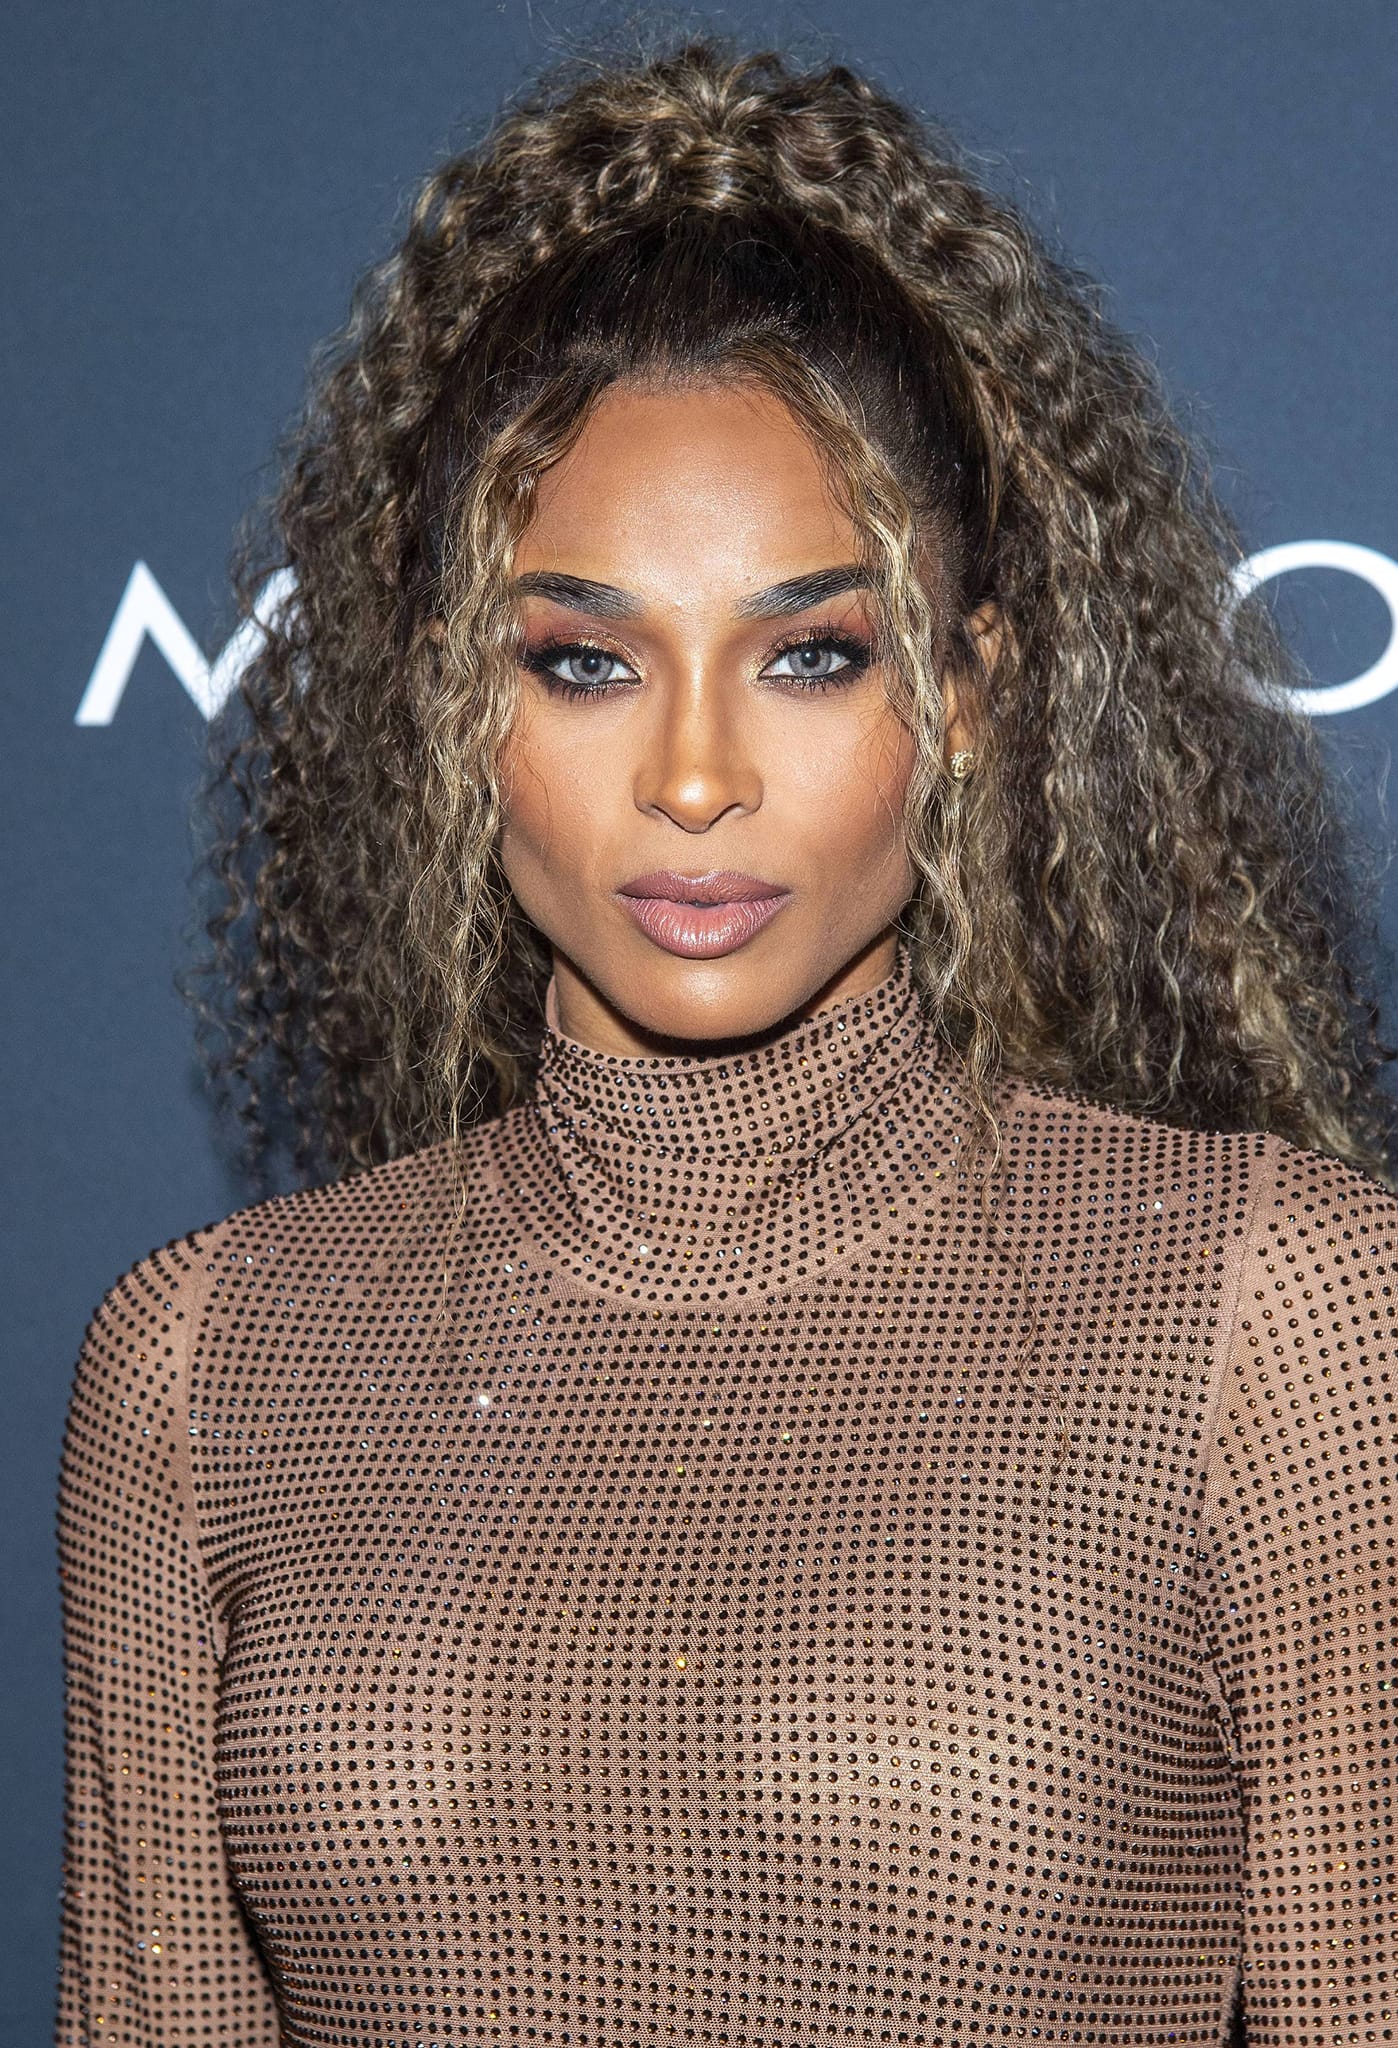 Ciara glams up with a curly ponytail wig, smokey eyes, hazel lenses, and nude pink lipstick